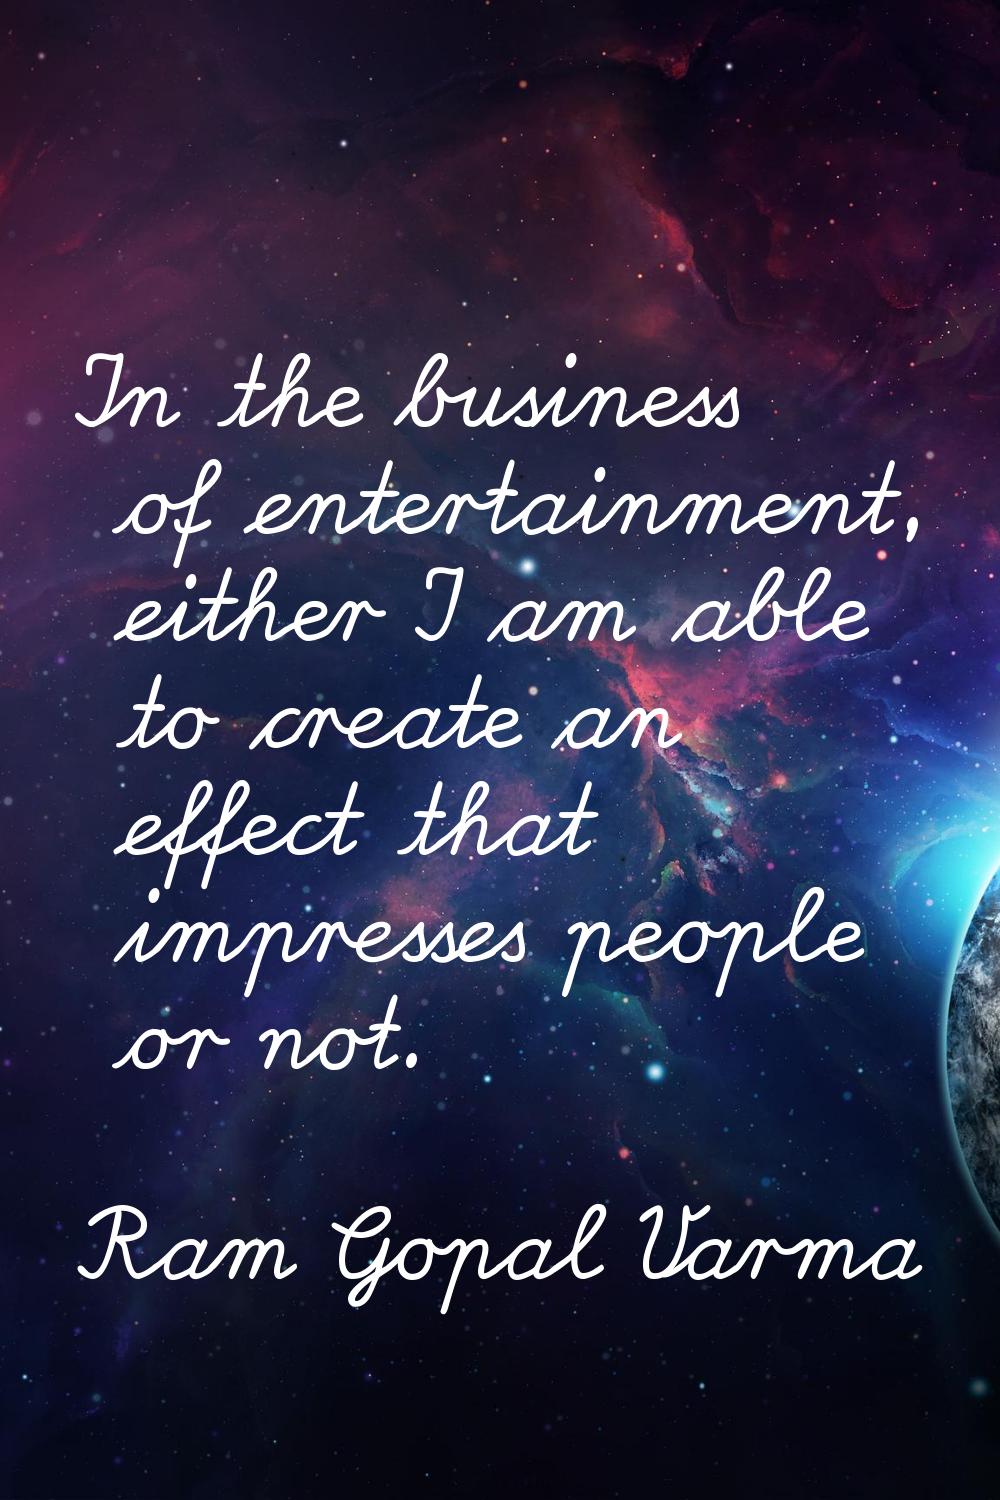 In the business of entertainment, either I am able to create an effect that impresses people or not